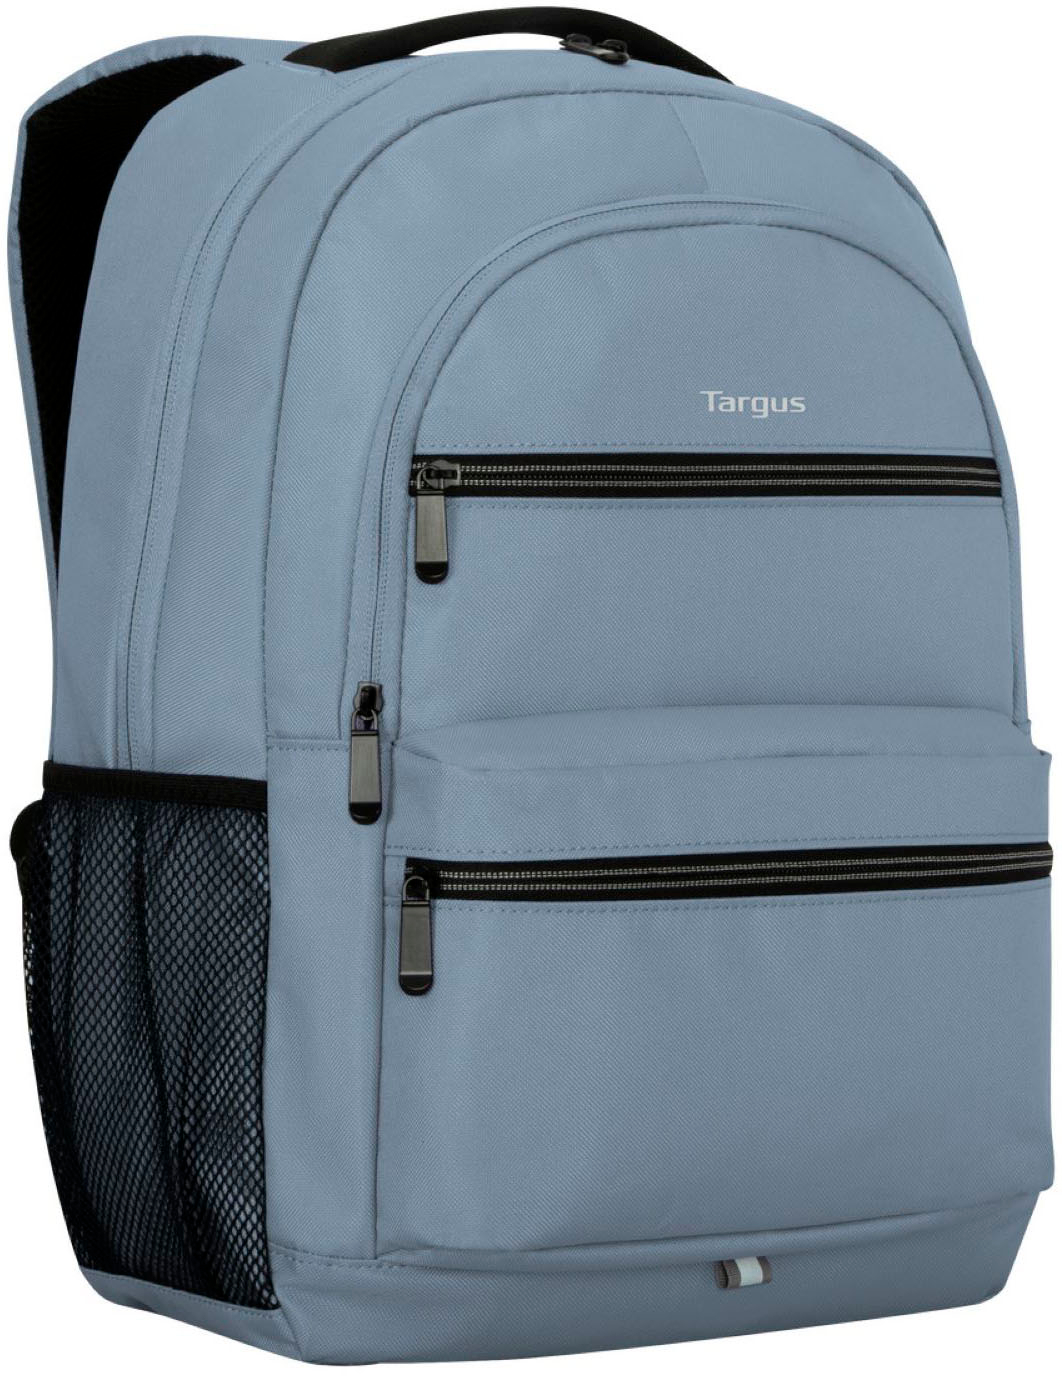 Angle View: Targus - Octave II Backpack for 15.6” Laptops - Blue